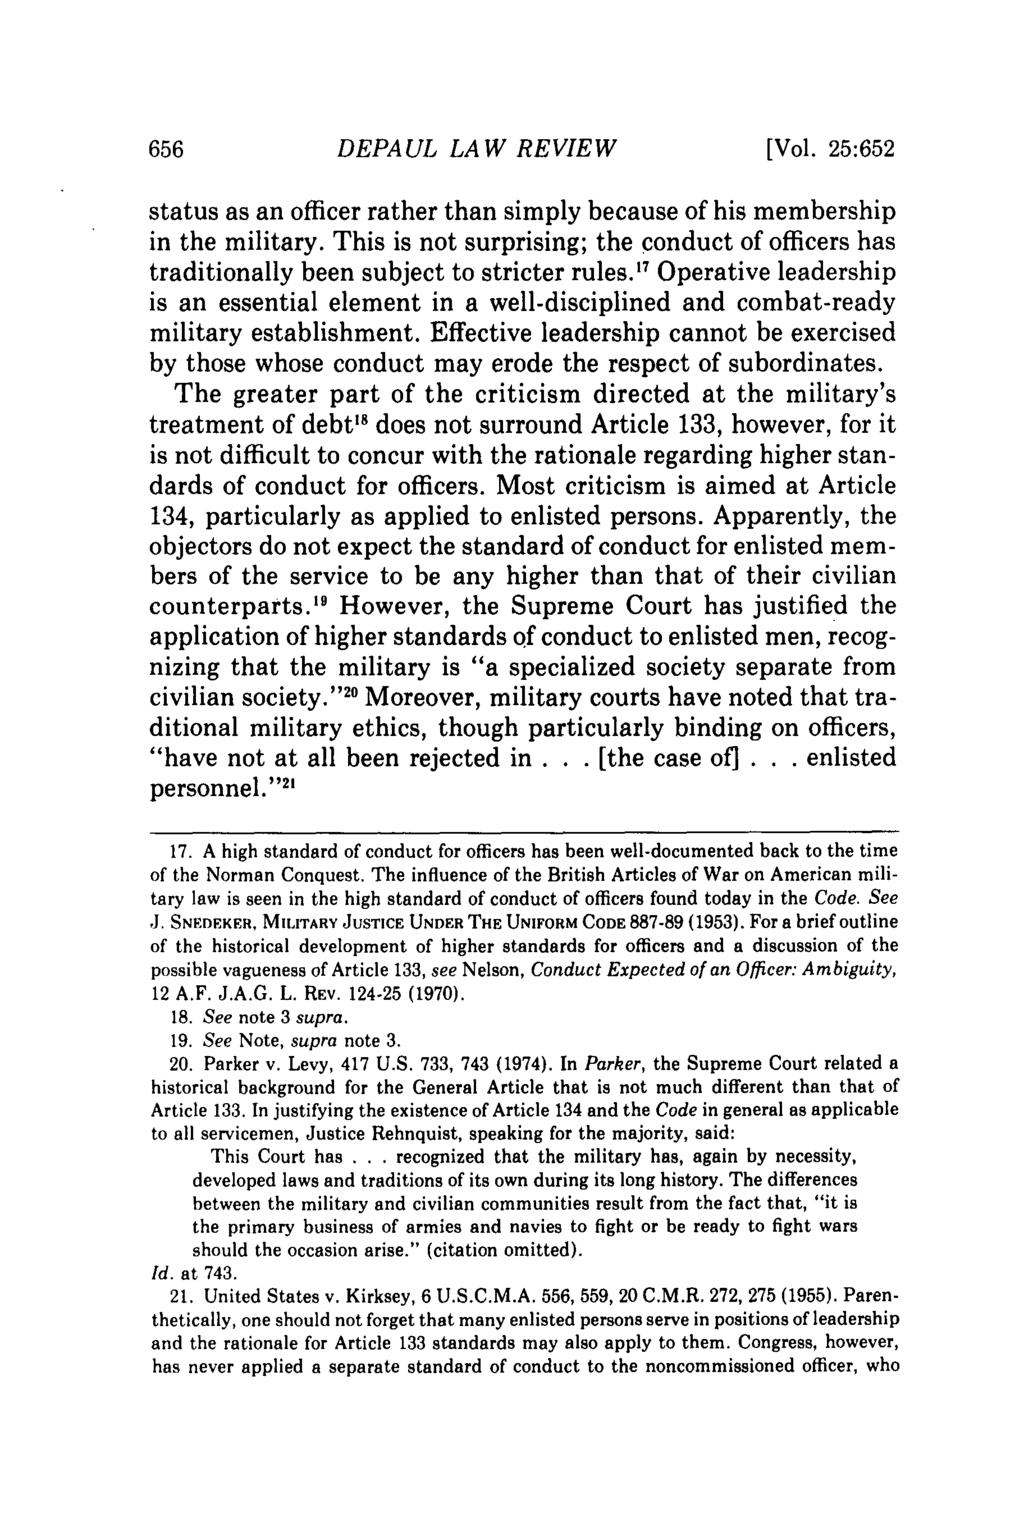 DEPAUL LAW REVIEW [Vol. 25:652 status as an officer rather than simply because of his membership in the military.